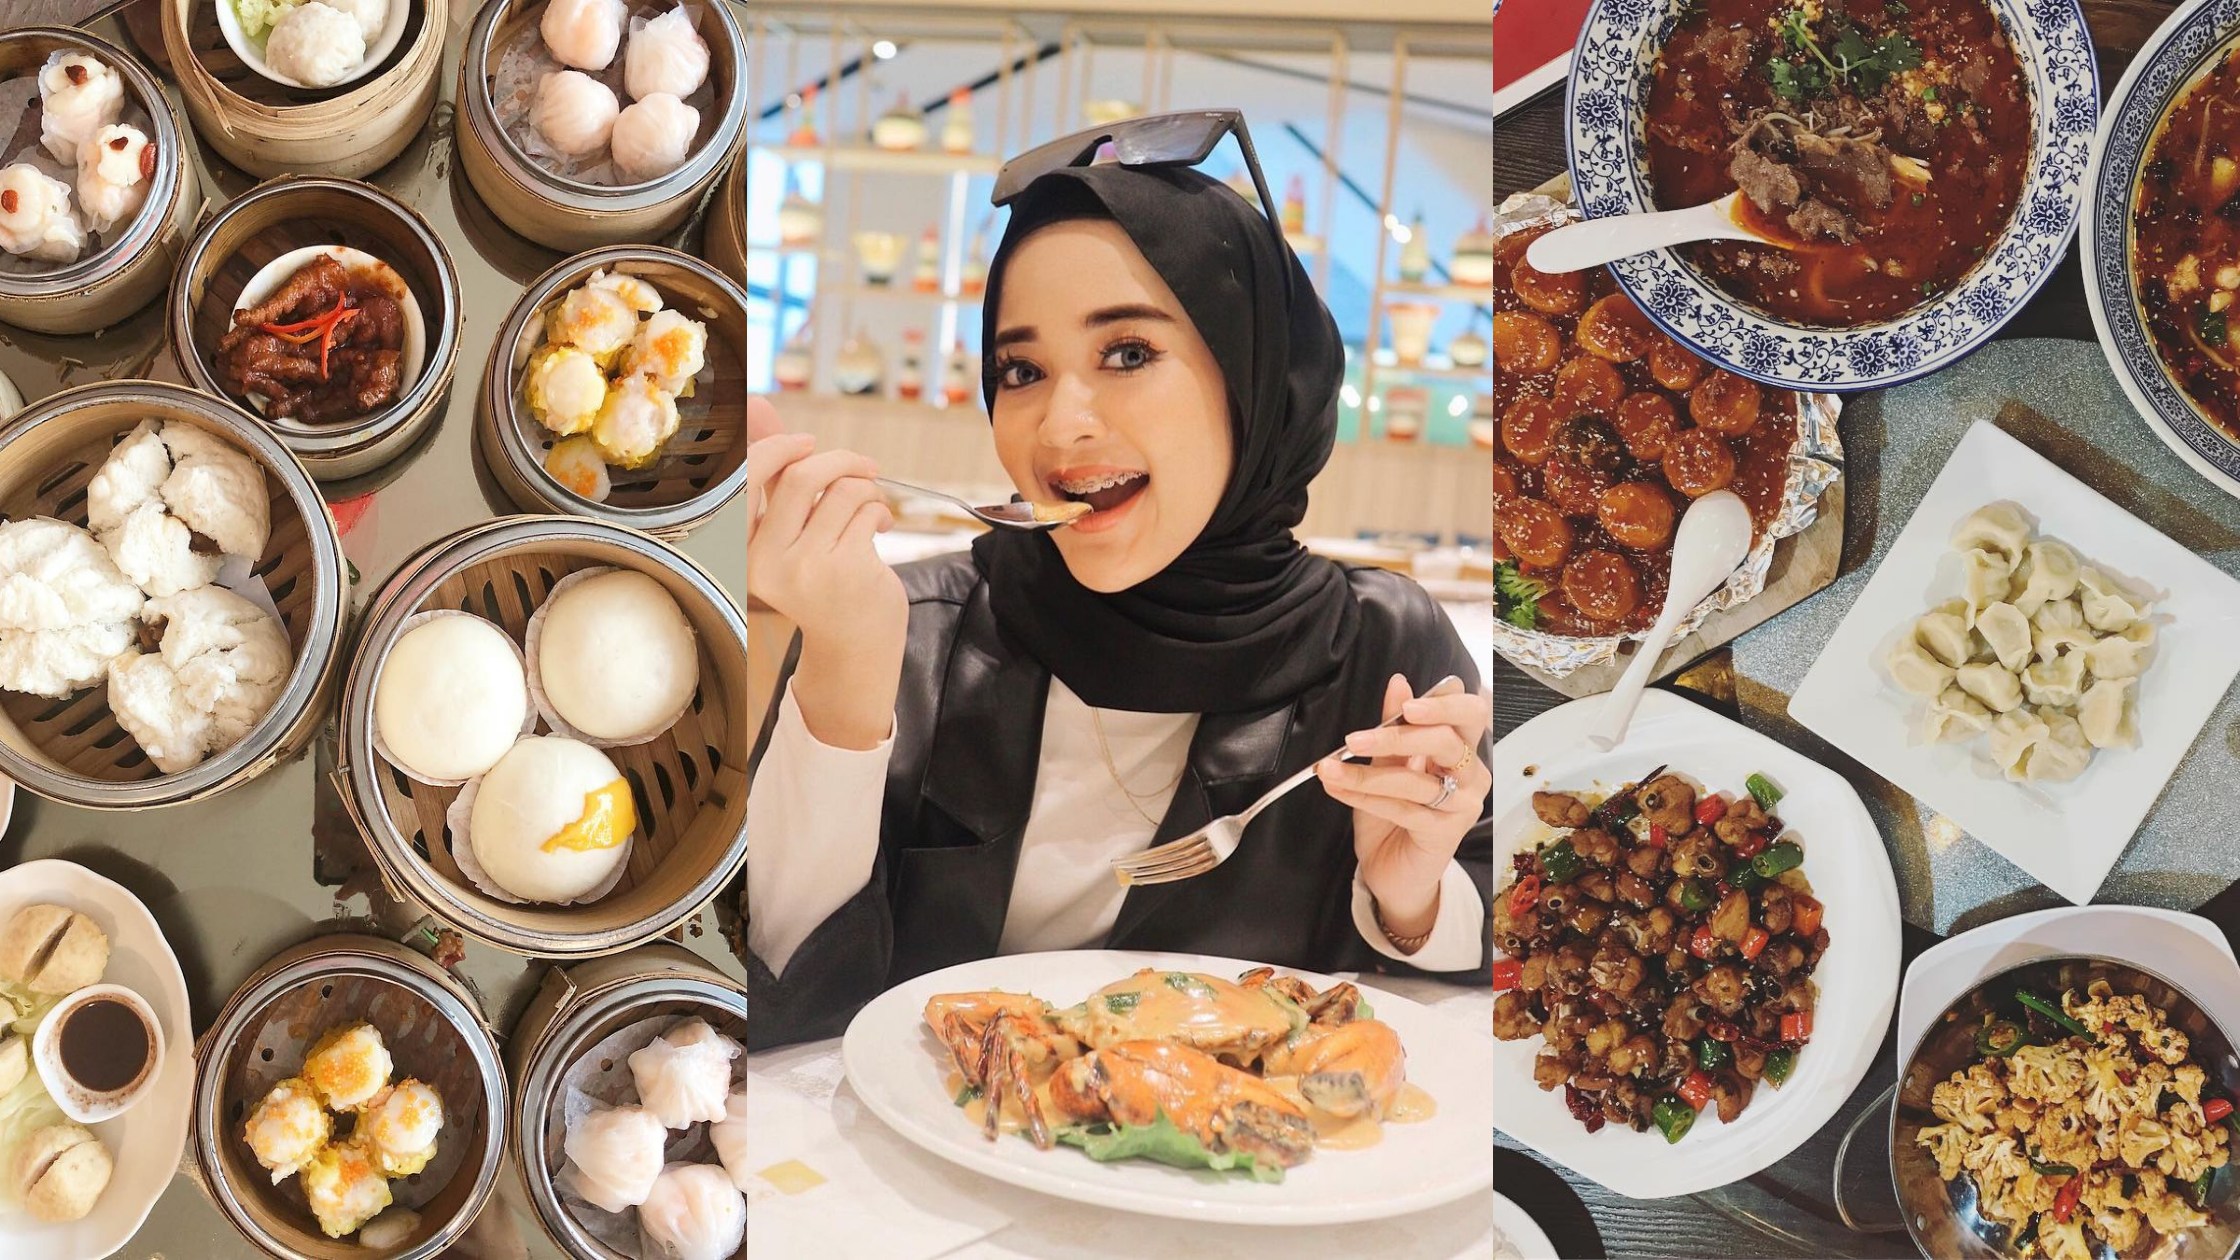 10 Best Halal Chinese Restaurants In Kl Muslim Friendly Venues Serving Yummy Chinese Cuisine Klook Travel Blog